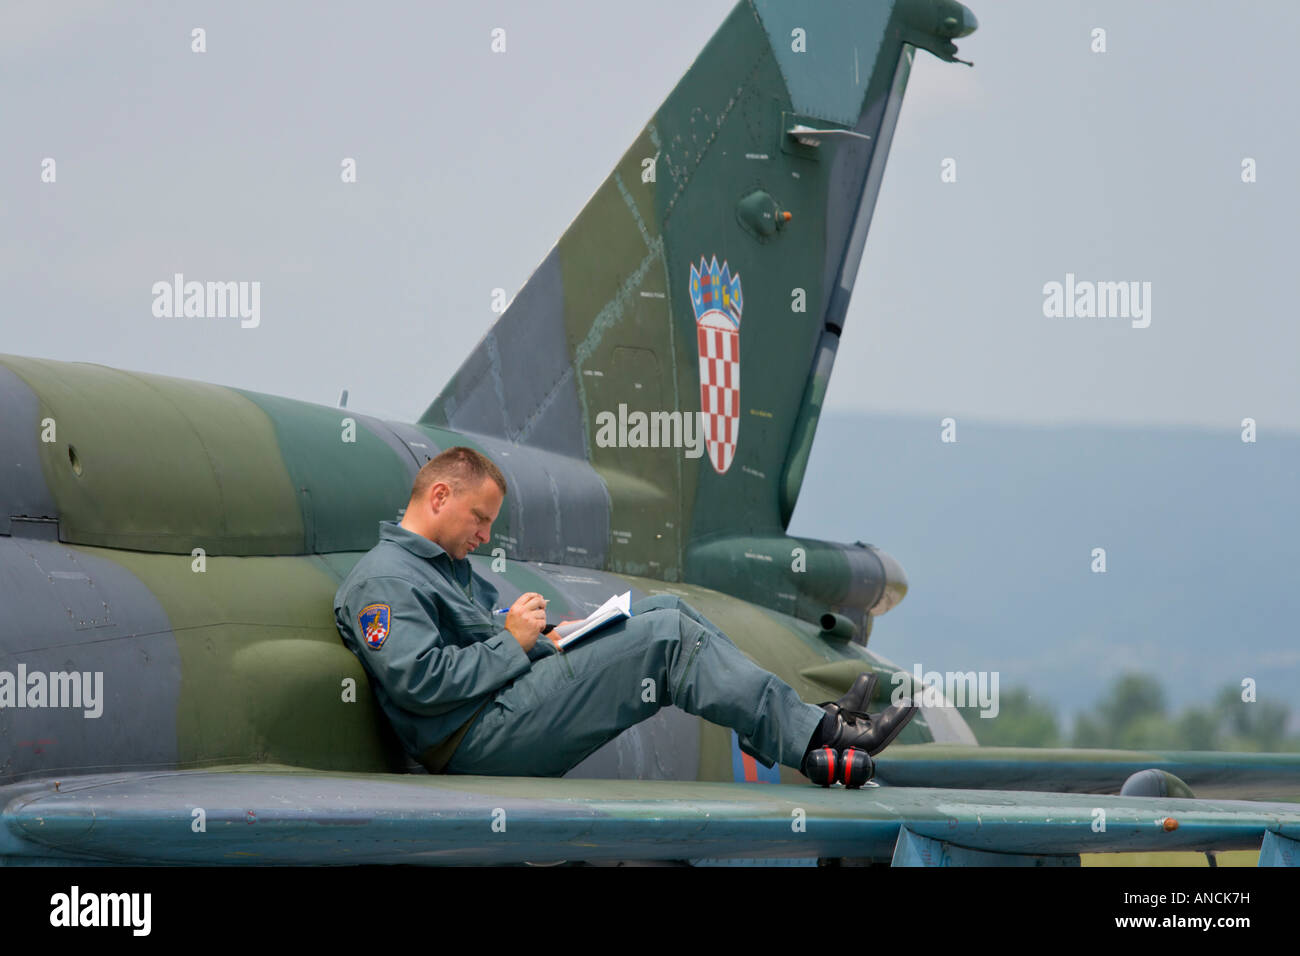 Croatian Air Force MiG-21 BISD fighter, Pleso AFB during 'open day' visit in 2007, pilot is writing notes while sitting on wing Stock Photo